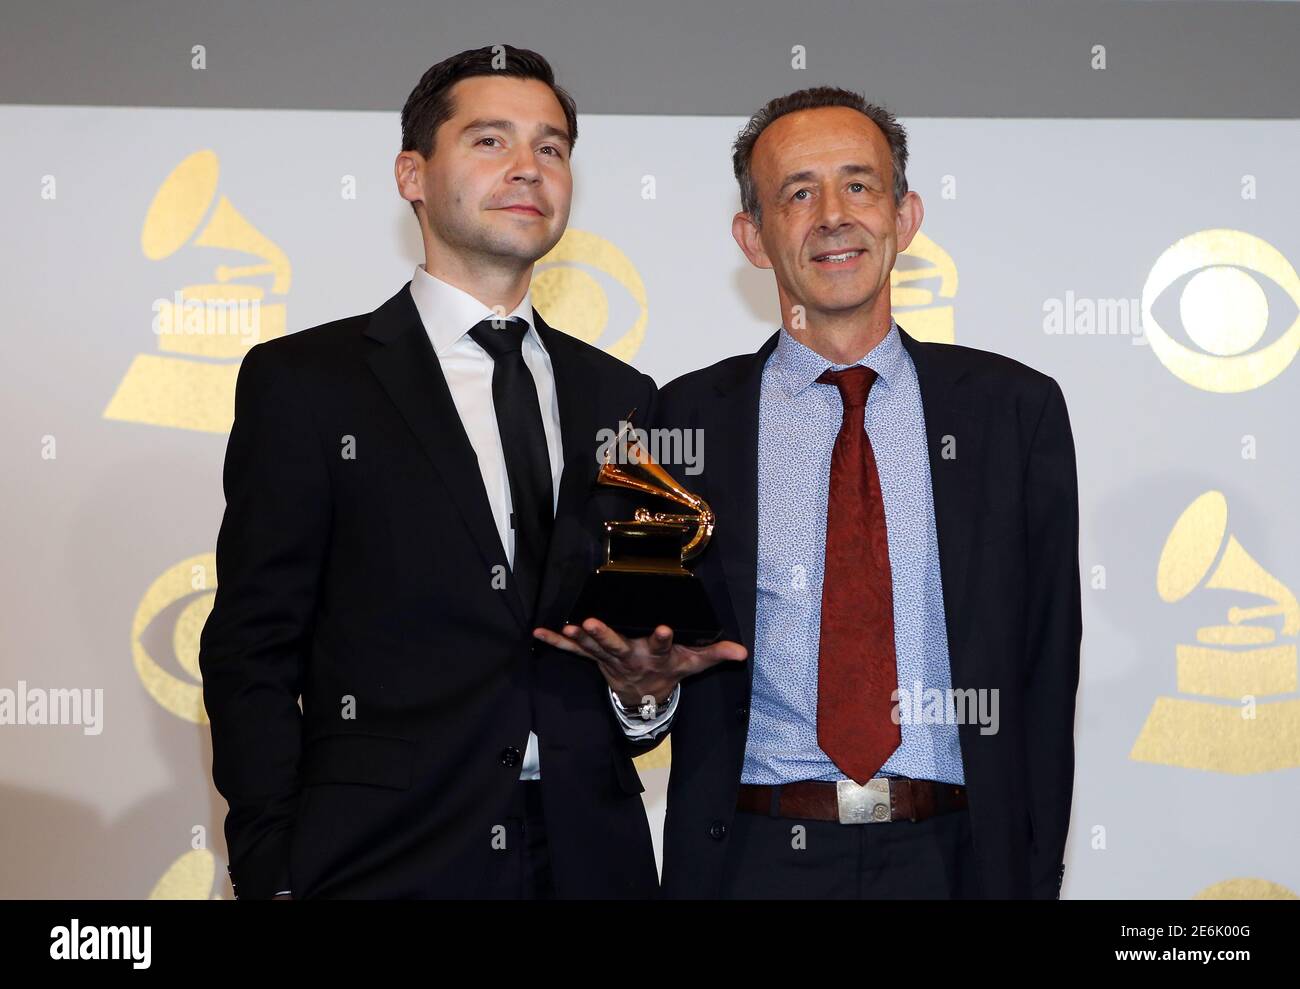 Engineers Joe LaPorta (L) and Kevin Killen hold their award for Best Engineered Album, Non-Classical for Blackstar during the 59th Annual Grammy Awards in Los Angeles, California, U.S. , February 12, 2017. REUTERS/Mike Blake Stock Photo